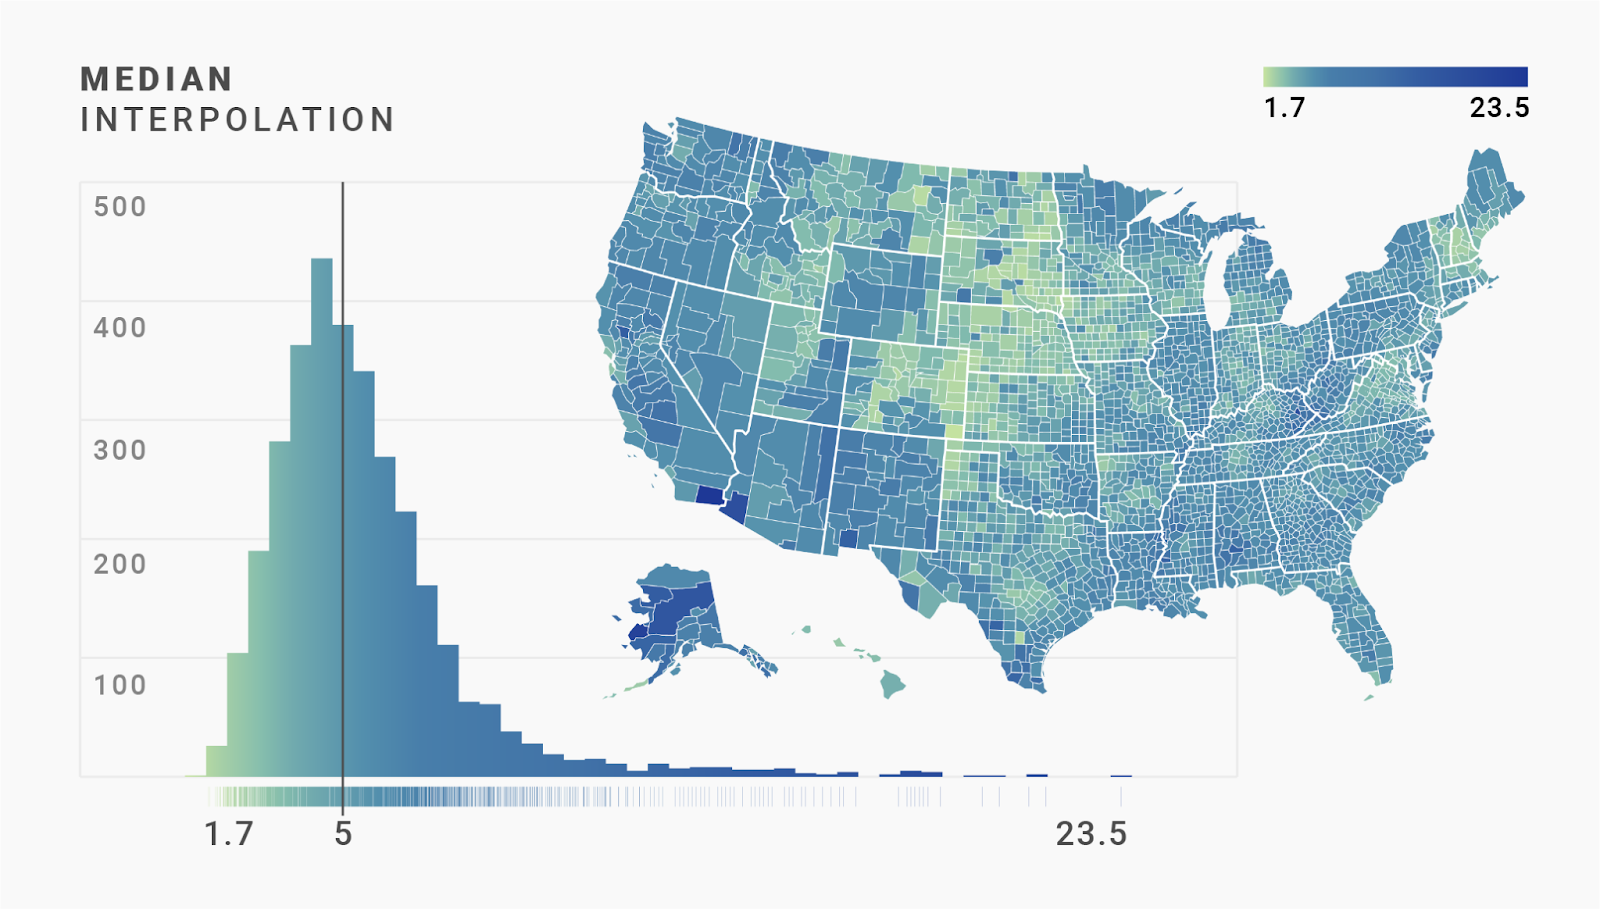 Histogram and choropleth map for a median interpolation